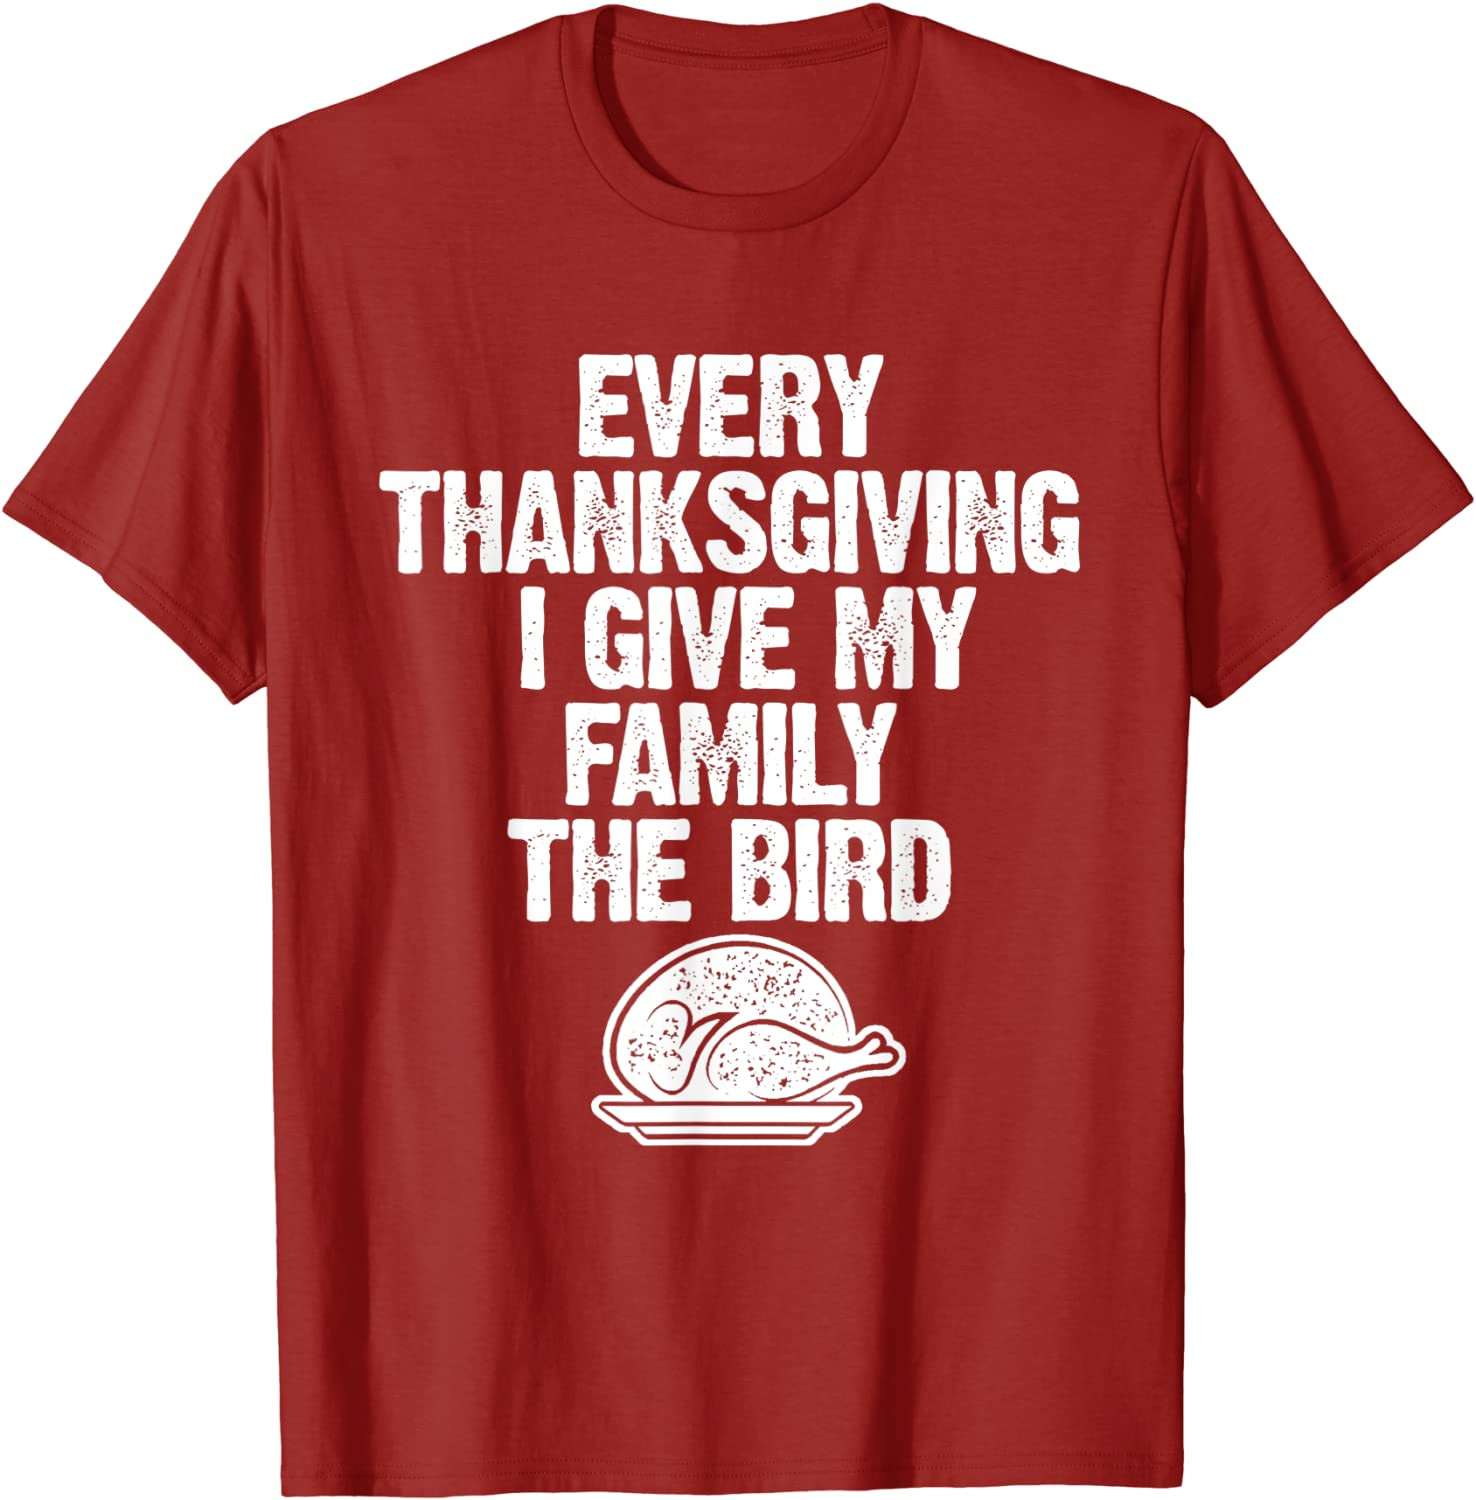 Every Thanksgiving I Give My Family The Bird T-Shirt